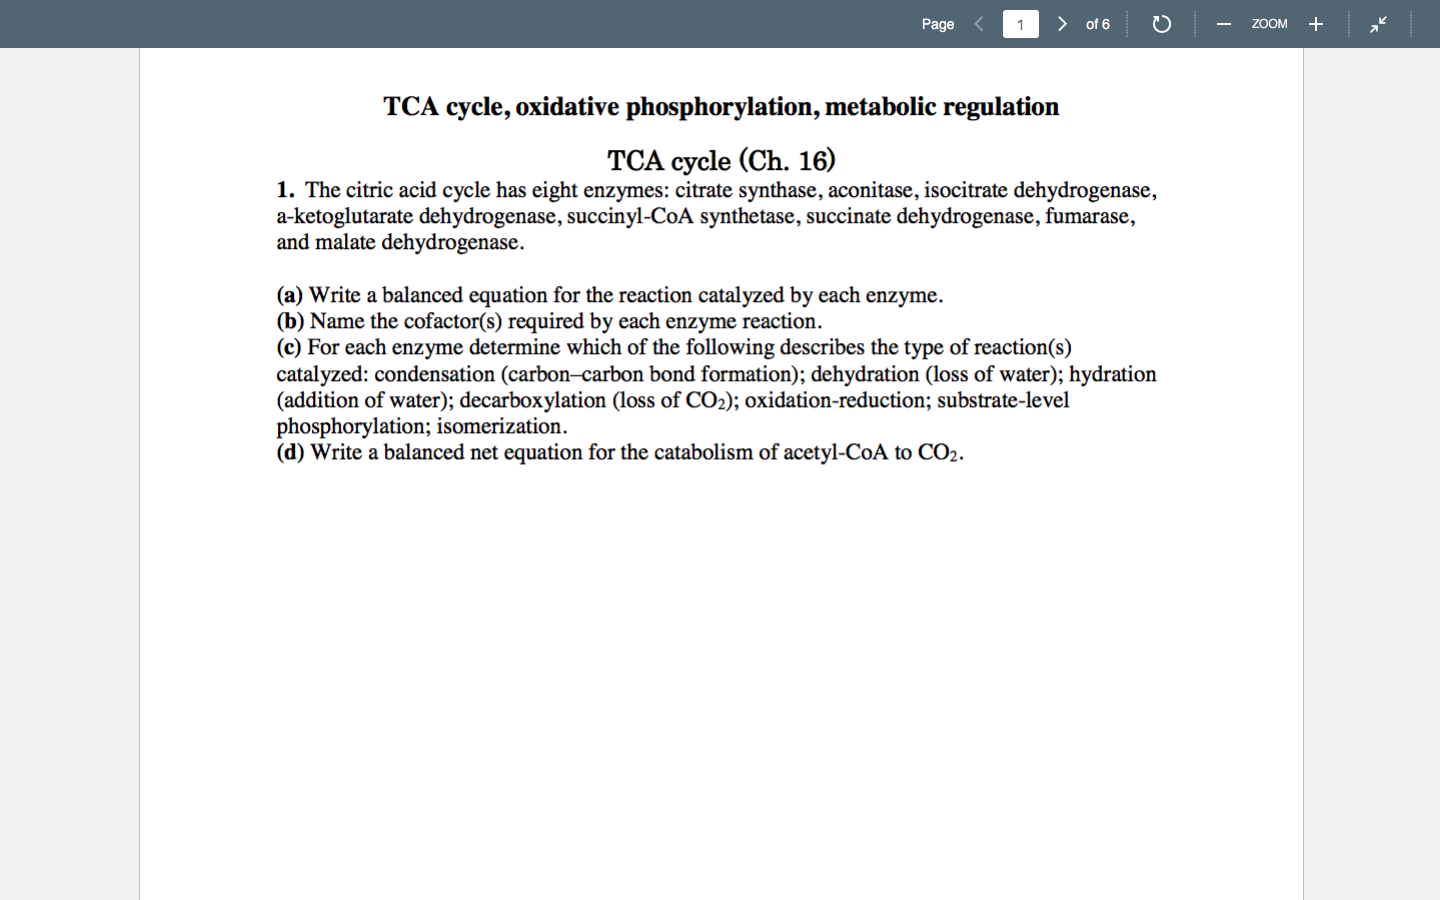 Page
> of 6
ZOOM +
TCA cycle, oxidative phosphorylation, metabolic regulation
TCA cycle (Ch. 16)
1. The citric acid cycle has eight enzymes: citrate synthase, aconitase, isocitrate dehydrogenase,
a-ketoglutarate dehydrogenase, succinyl-CoA synthetase, succinate dehydrogenase, fumarase,
and malate dehydrogenase.
(a) Write a balanced equation for the reaction catalyzed by each enzyme.
(b) Name the cofactor(s) required by each enzyme reaction.
(c) For each enzyme determine which of the following describes the type of reaction(s)
catalyzed: condensation (carbon–carbon bond formation); dehydration (loss of water); hydration
(addition of water); decarboxylation (loss of CO2); oxidation-reduction; substrate-level
phosphorylation; isomerization.
(d) Write a balanced net equation for the catabolism of acetyl-CoA to CO2.
